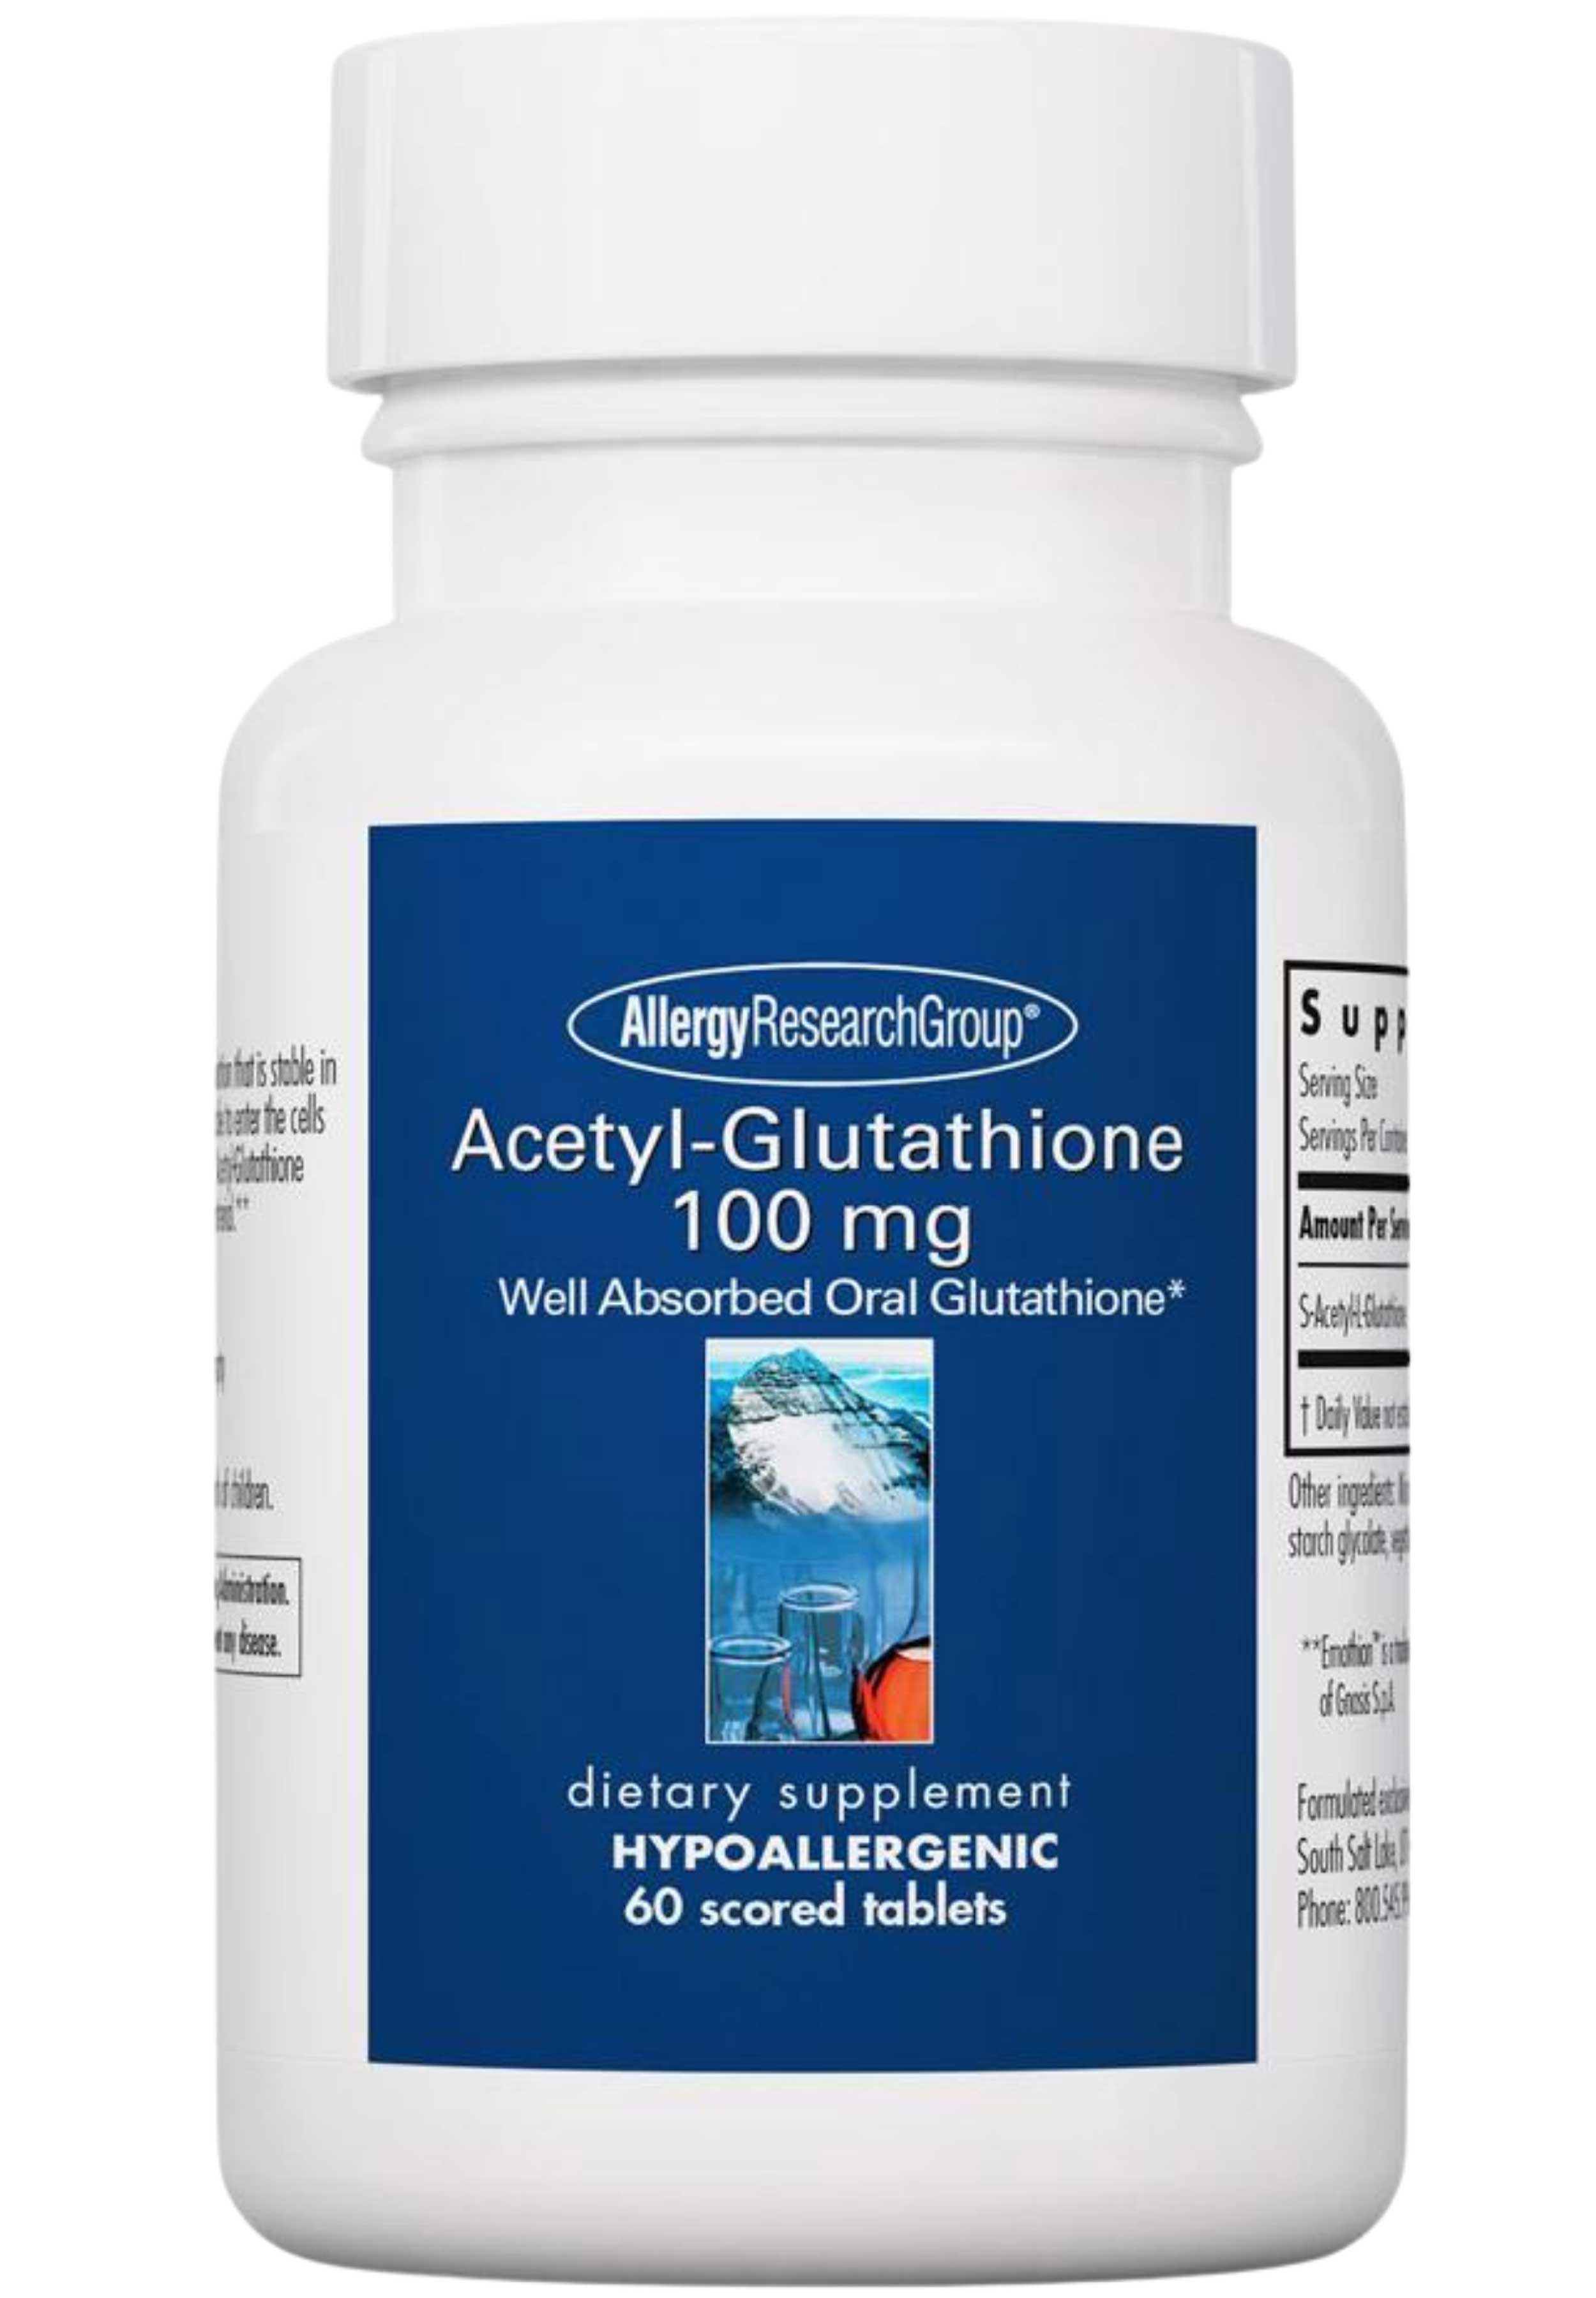 Allergy Research Group Acetyl-Glutathione 100 mg